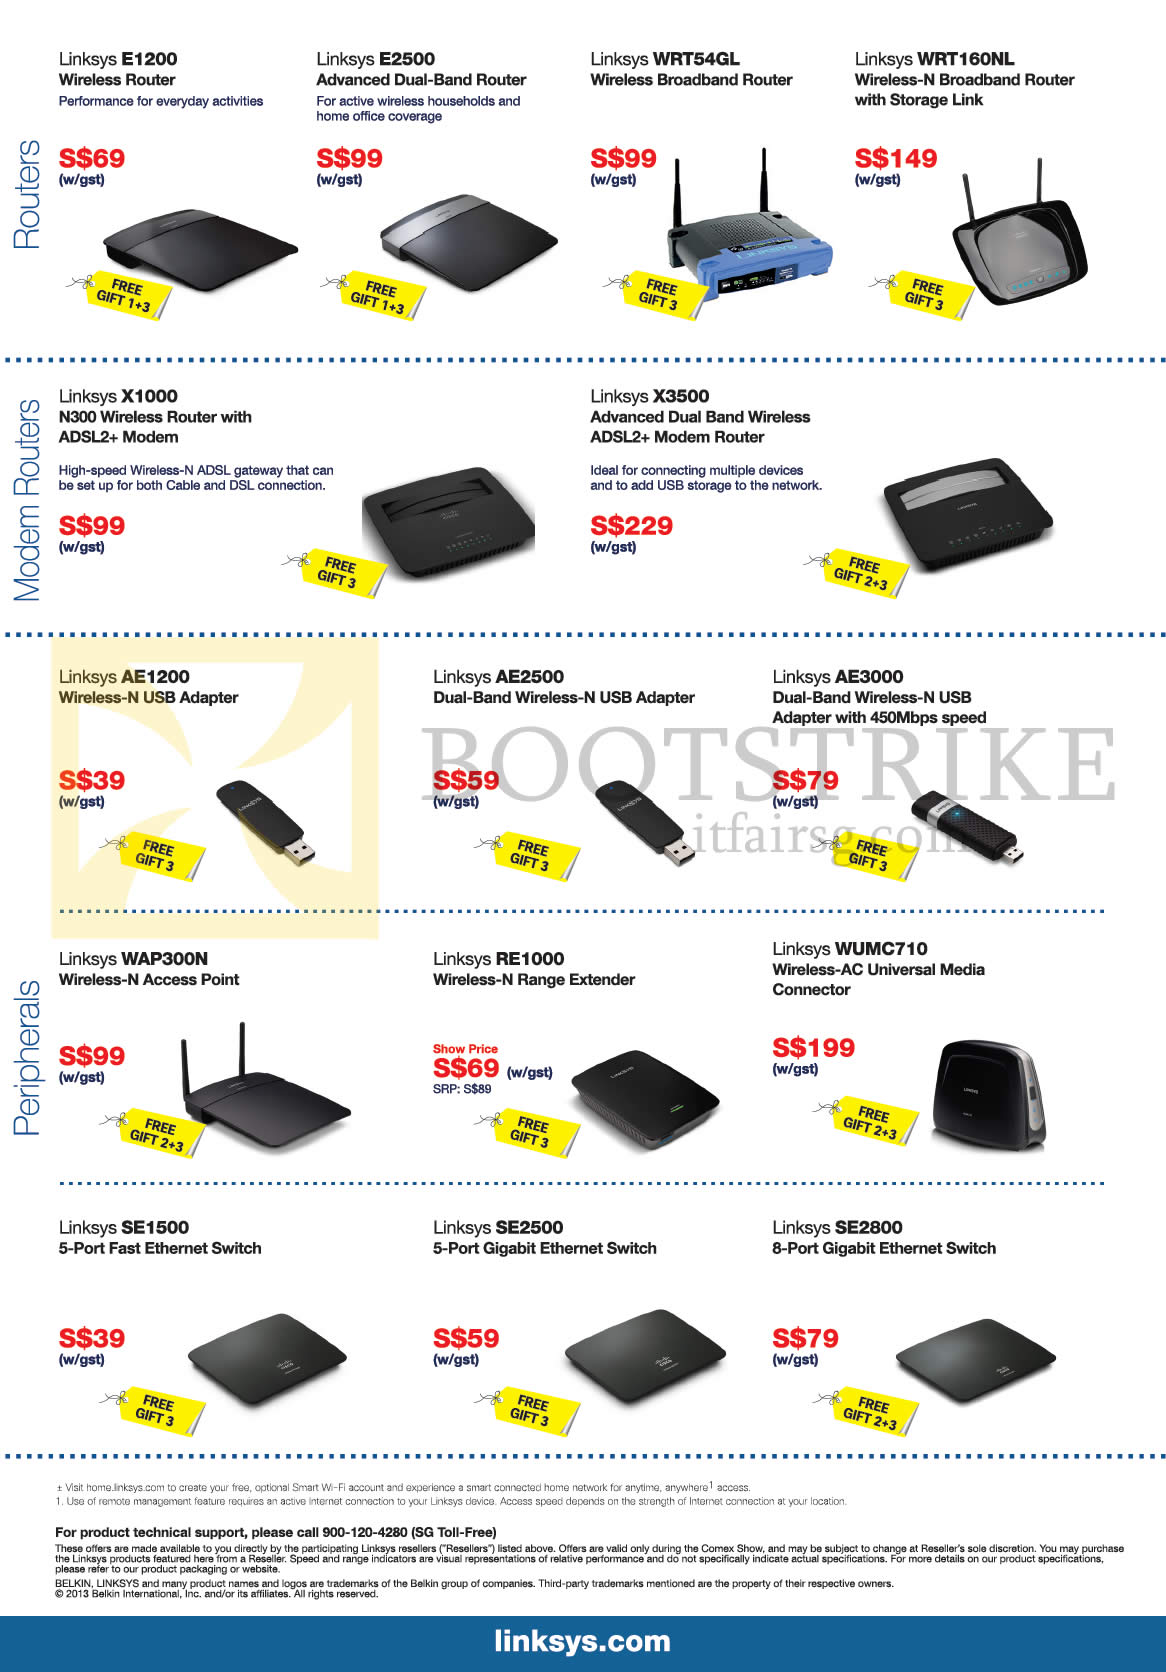 COMEX 2013 price list image brochure of Linksys Networking Routers E1200 E2500 WRT54GL WRT160NL, Modem X1000 X3500, USB Adapters, Range Extender, Switch